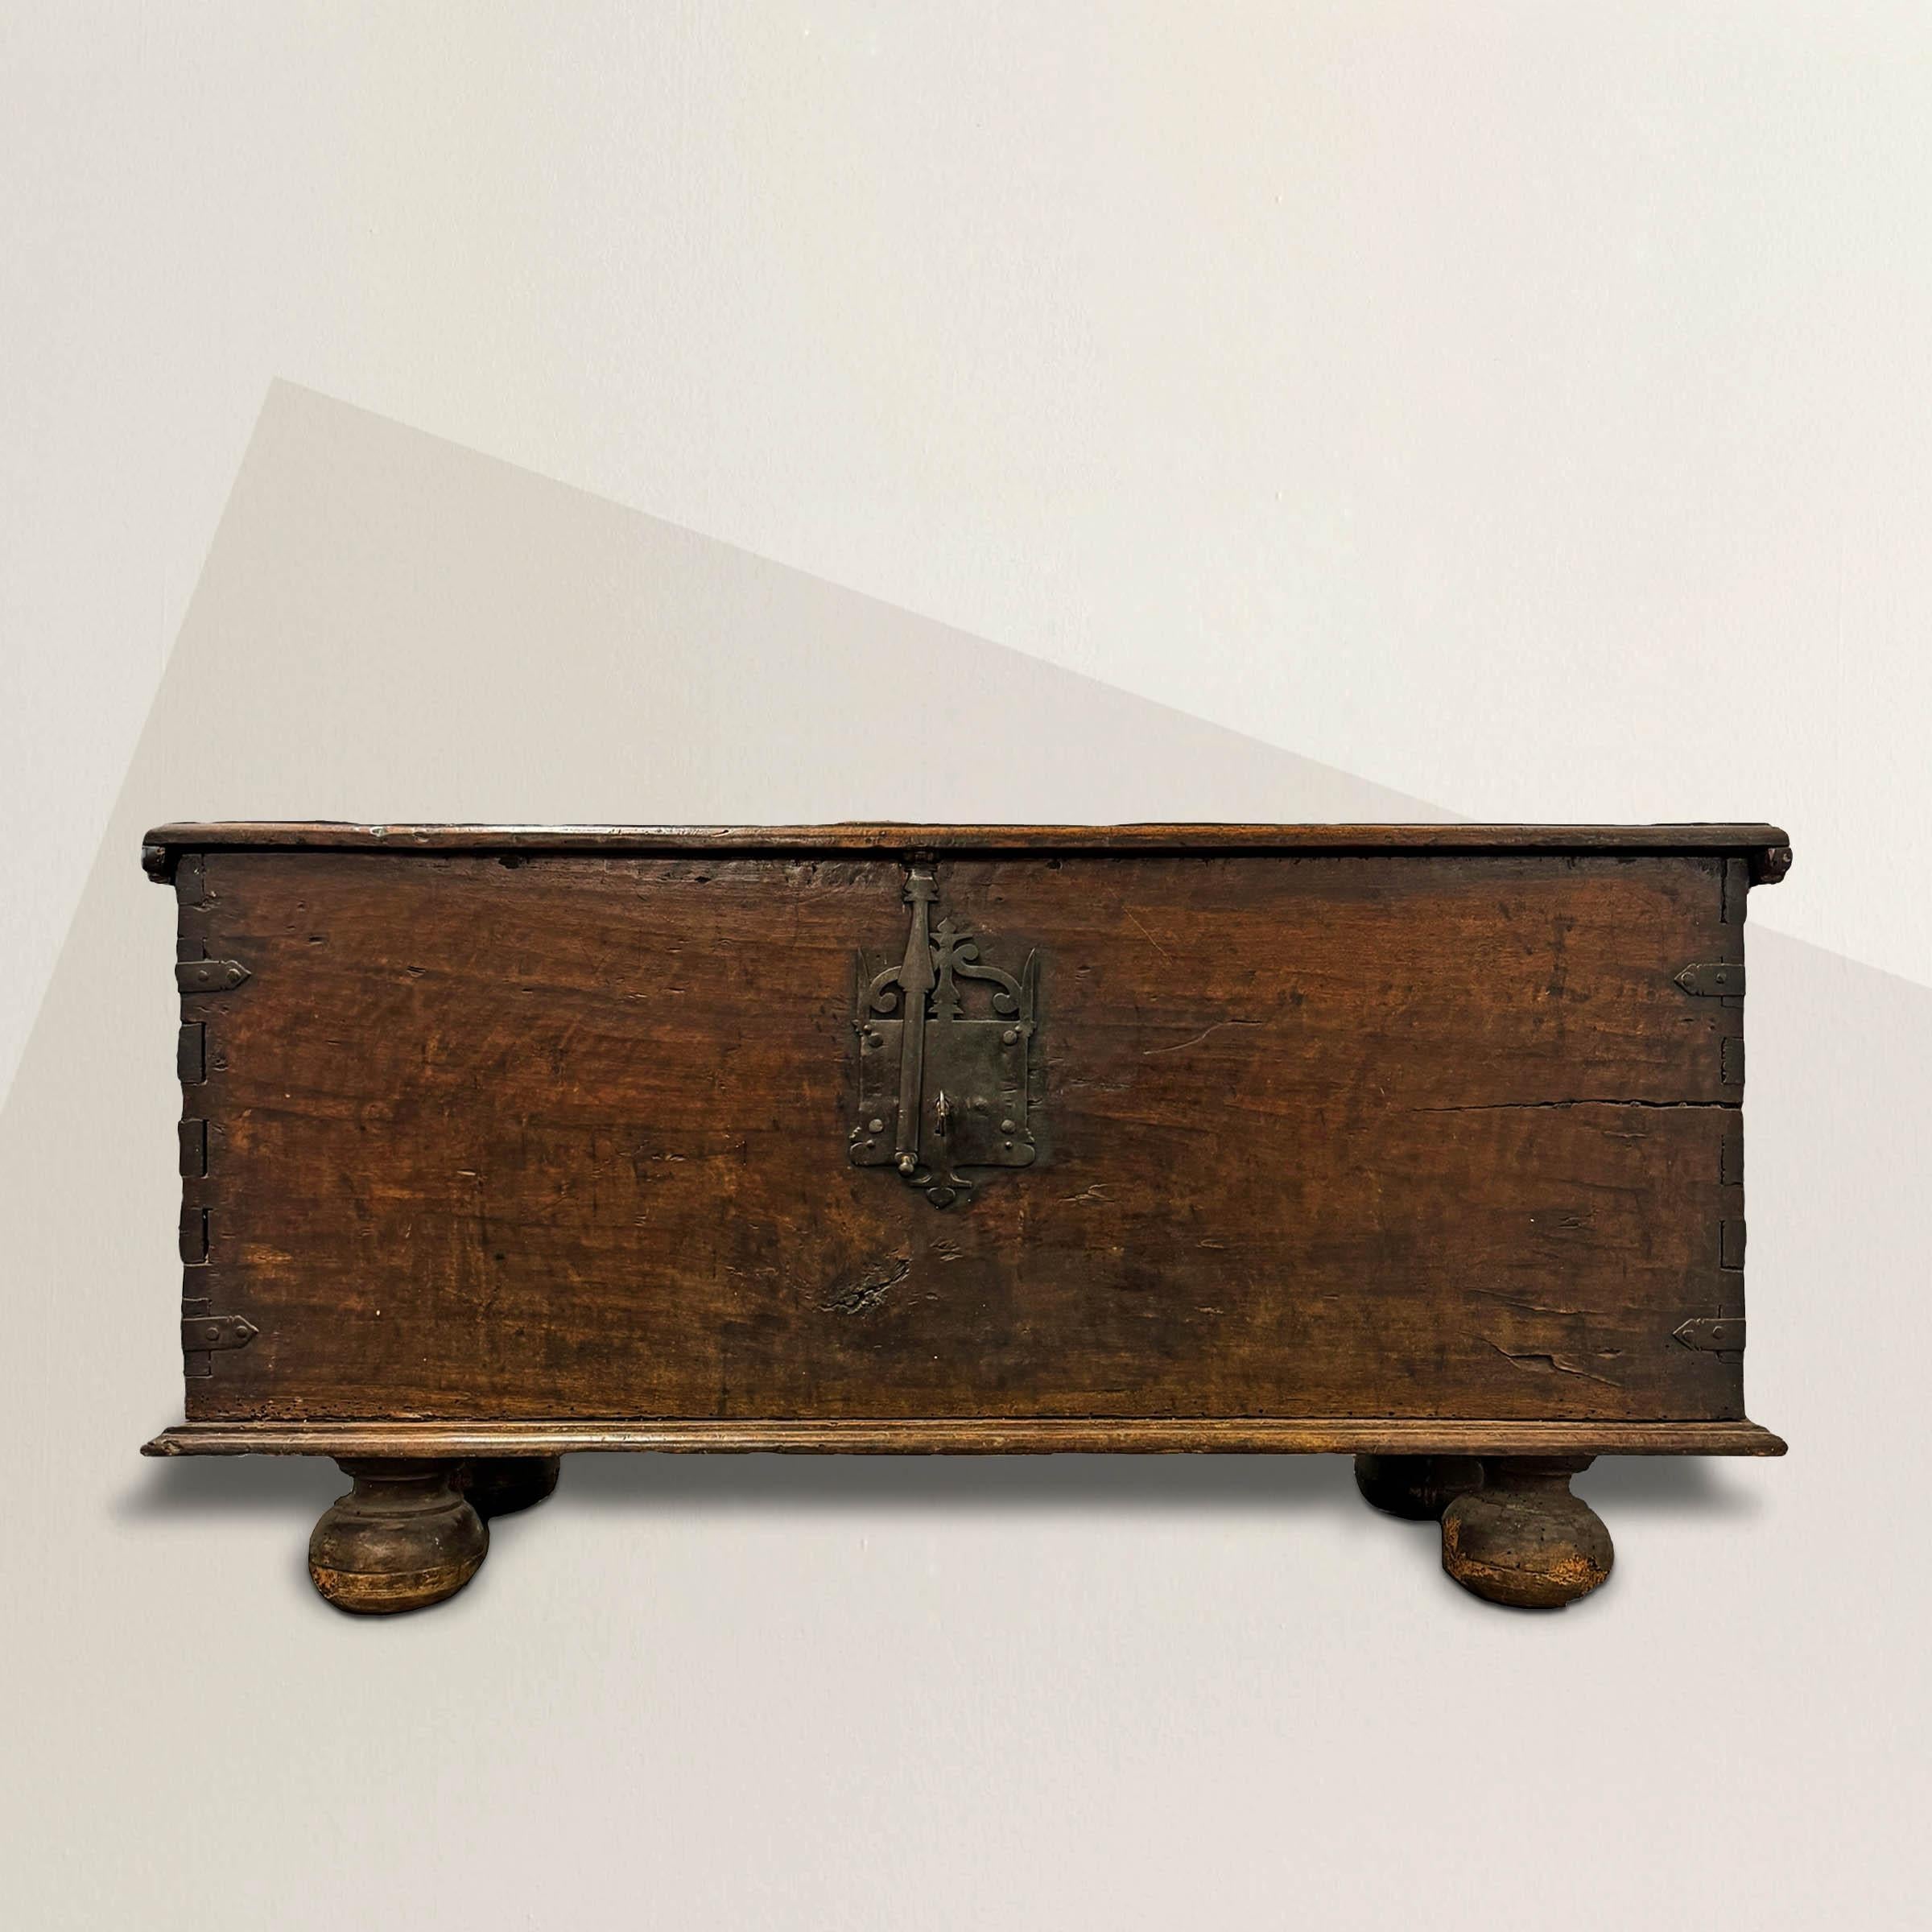 This 17th-century Spanish trunk epitomizes the grandeur and opulence of the Spanish Baroque period, showcasing unparalleled craftsmanship and timeless elegance. Constructed from solid one-inch thick planks, a testament to the craftsmanship of